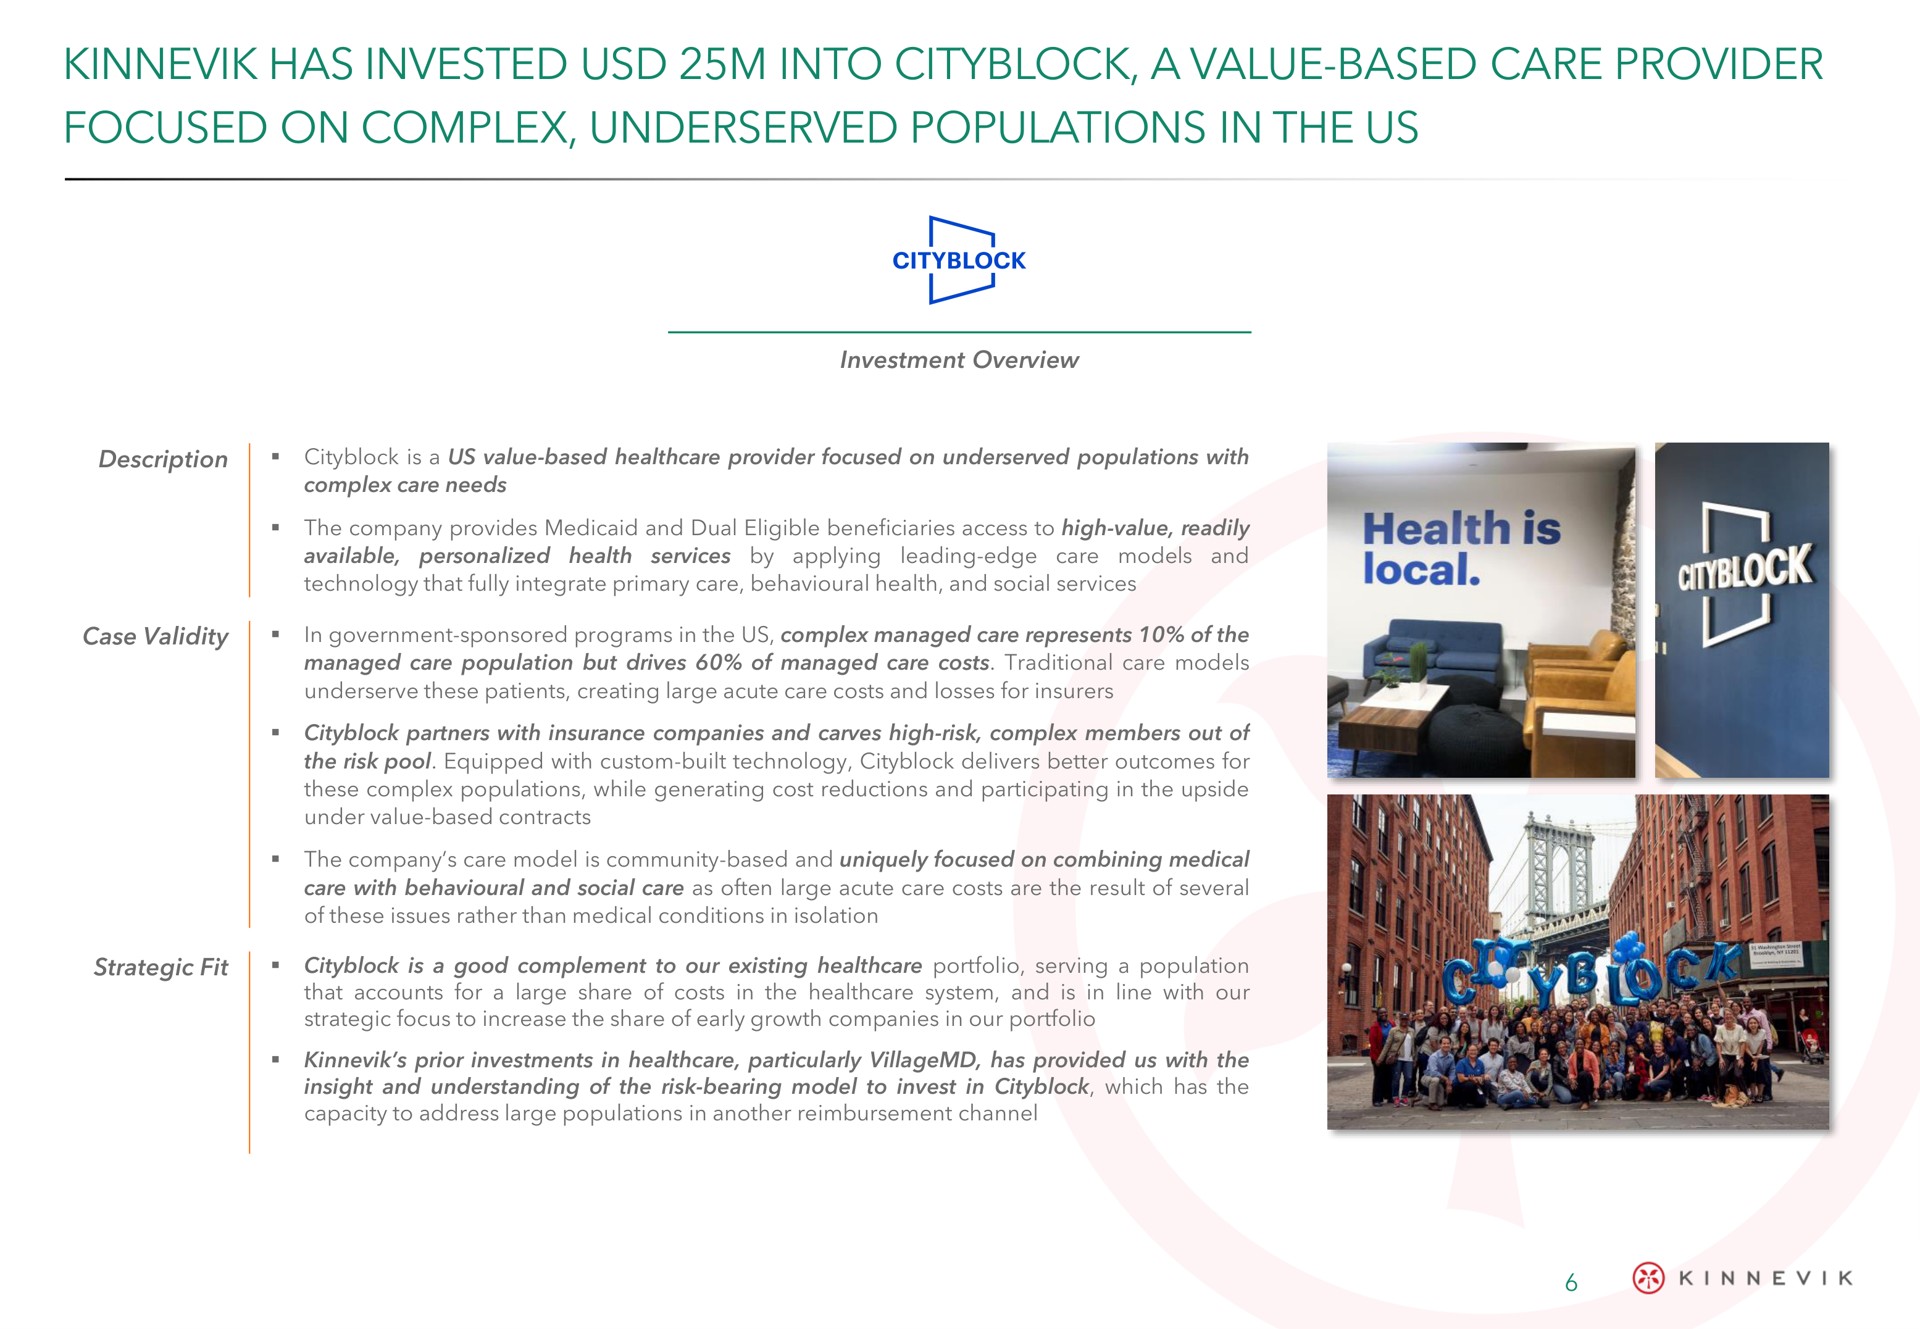 has invested into a value based care provider focused on complex populations in the us | Kinnevik